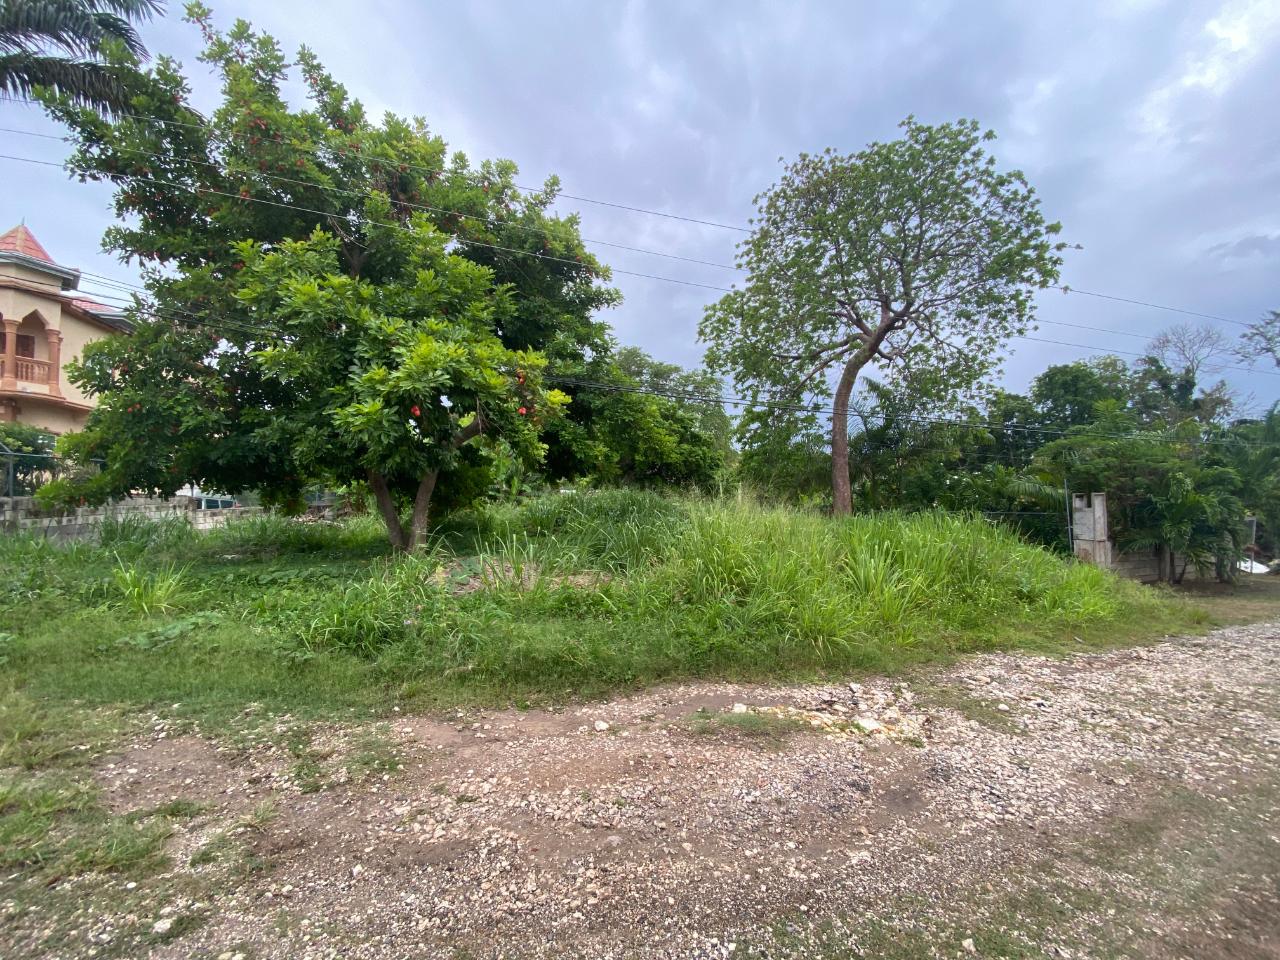 Residential Lot For Sale: ST. ANDREW TERRACE, Montego Bay | $80,000 | Keez